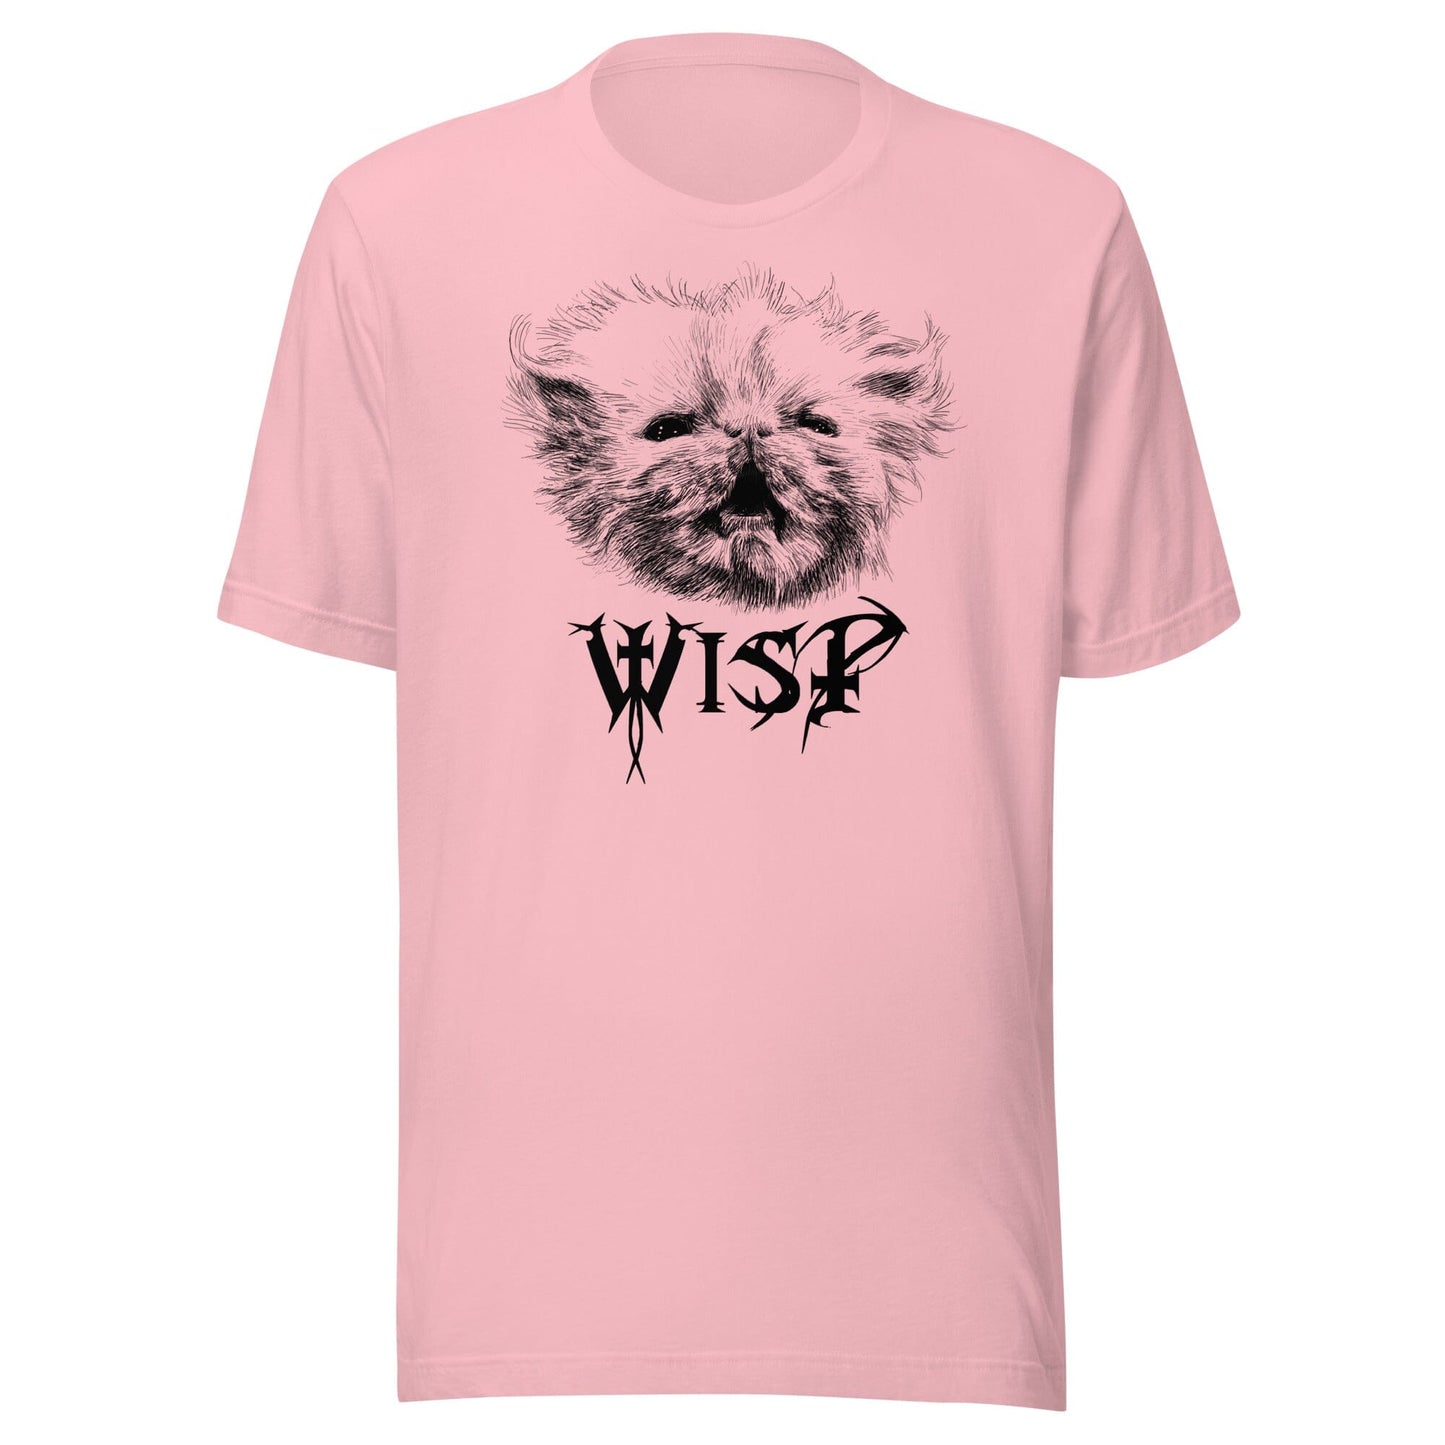 Metal Wisp T-Shirt [Unfoiled] (All net proceeds go to Rags to Riches Animal Rescue) JoyousJoyfulJoyness Pink S 